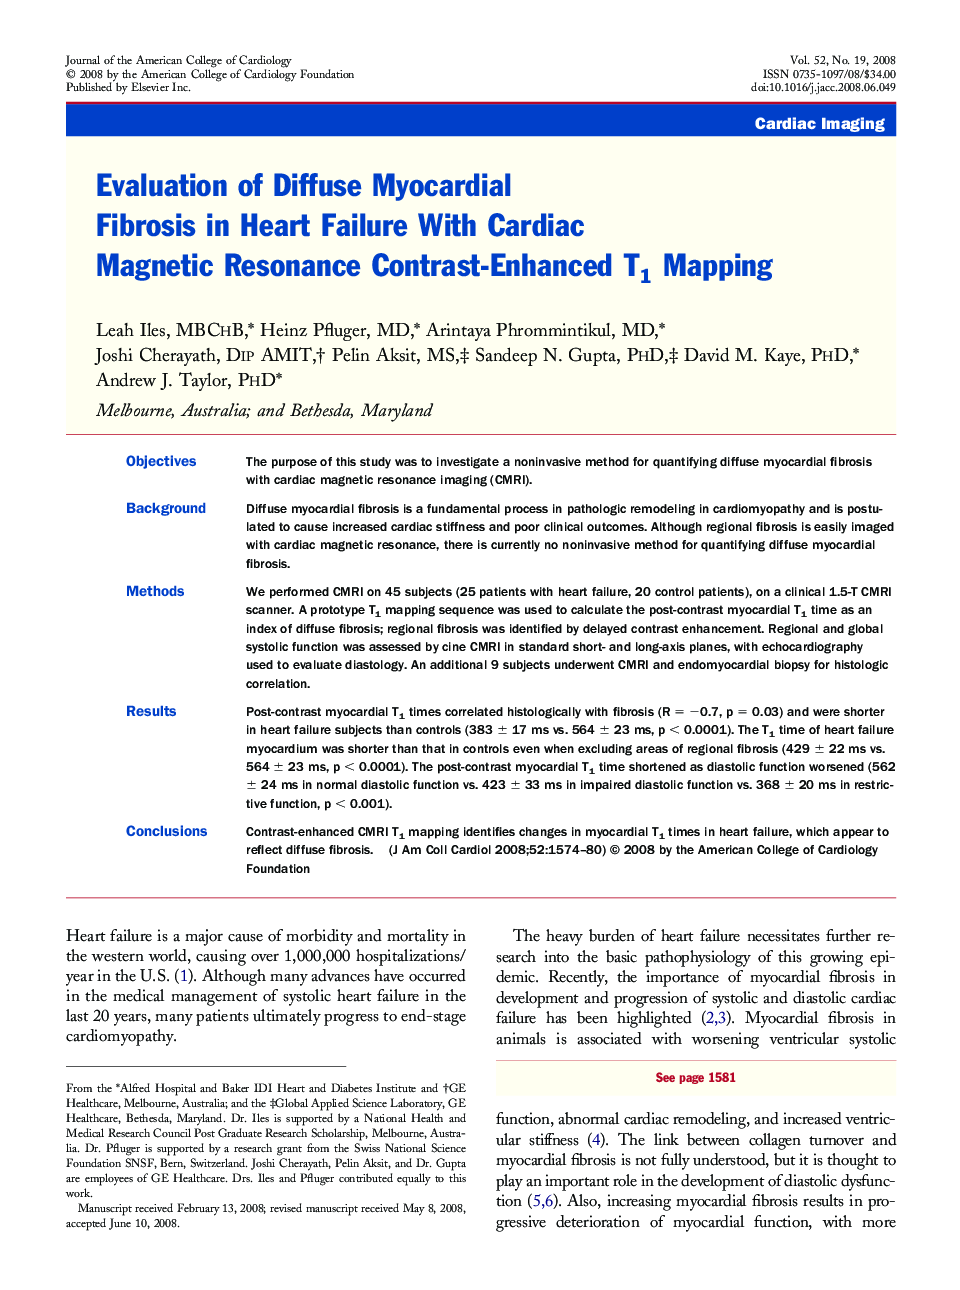 Evaluation of Diffuse Myocardial Fibrosis in Heart Failure With Cardiac Magnetic Resonance Contrast-Enhanced T1 Mapping 